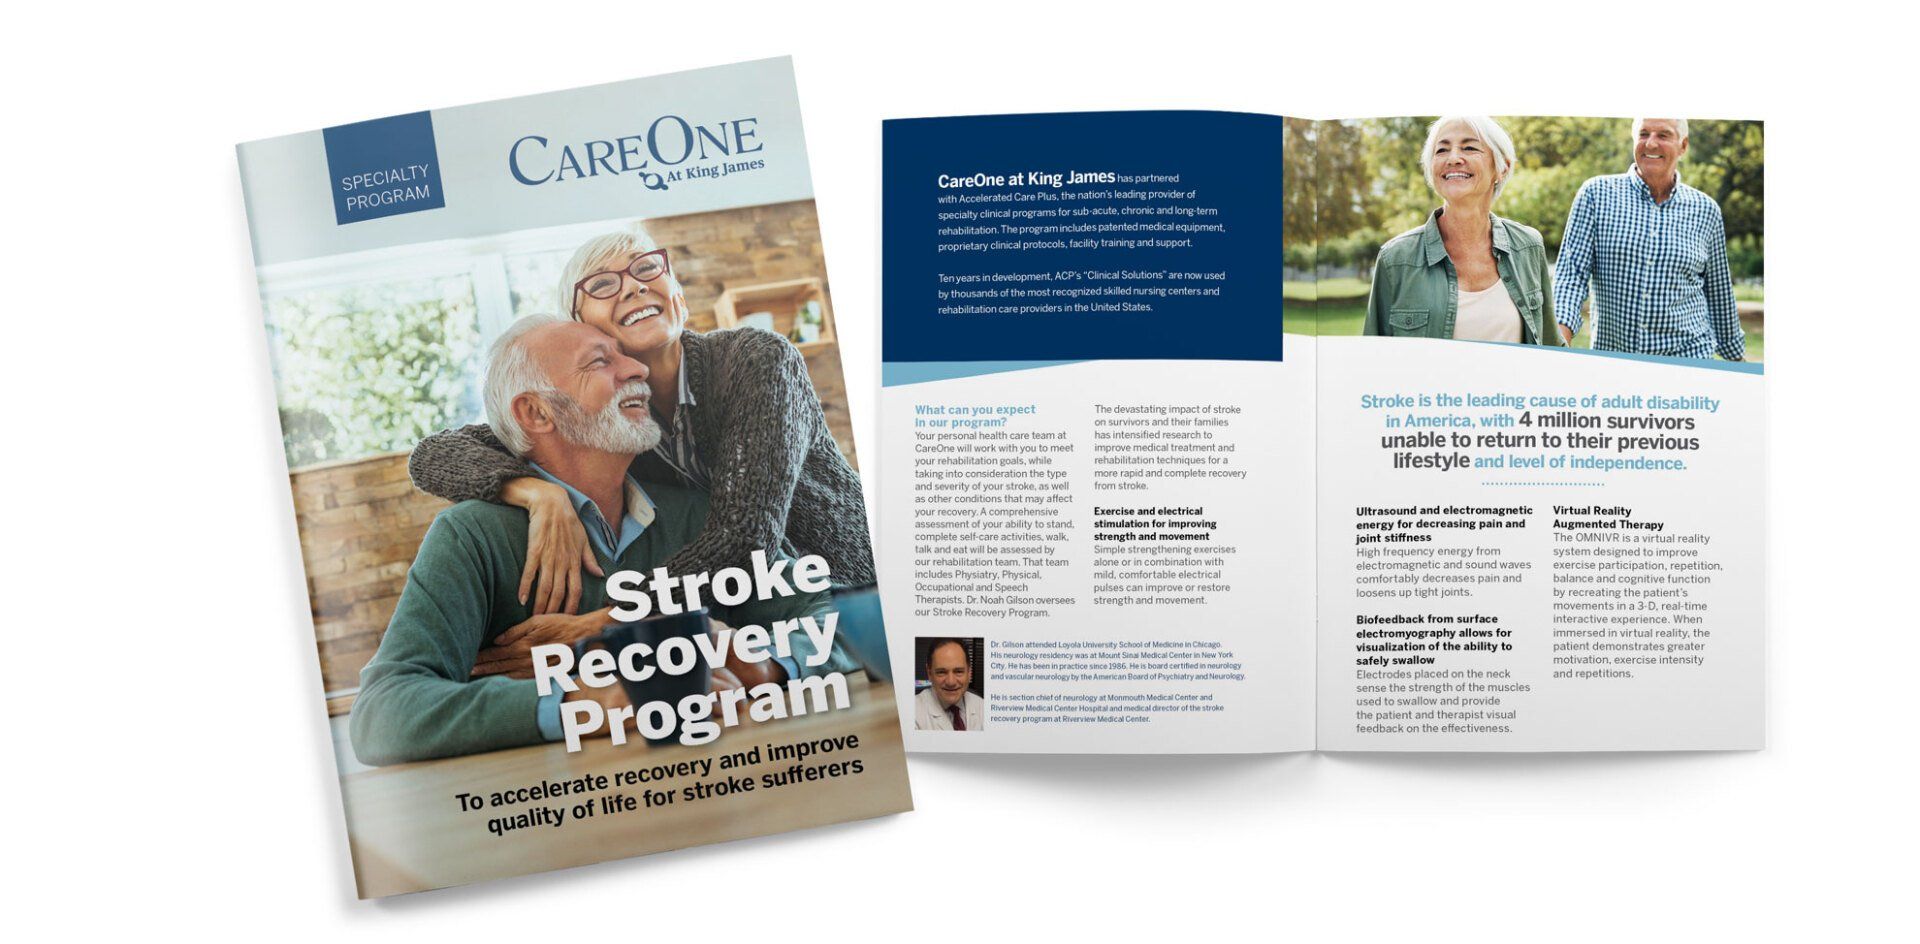 A brochure for a stroke recovery program shows a man and woman hugging each other.